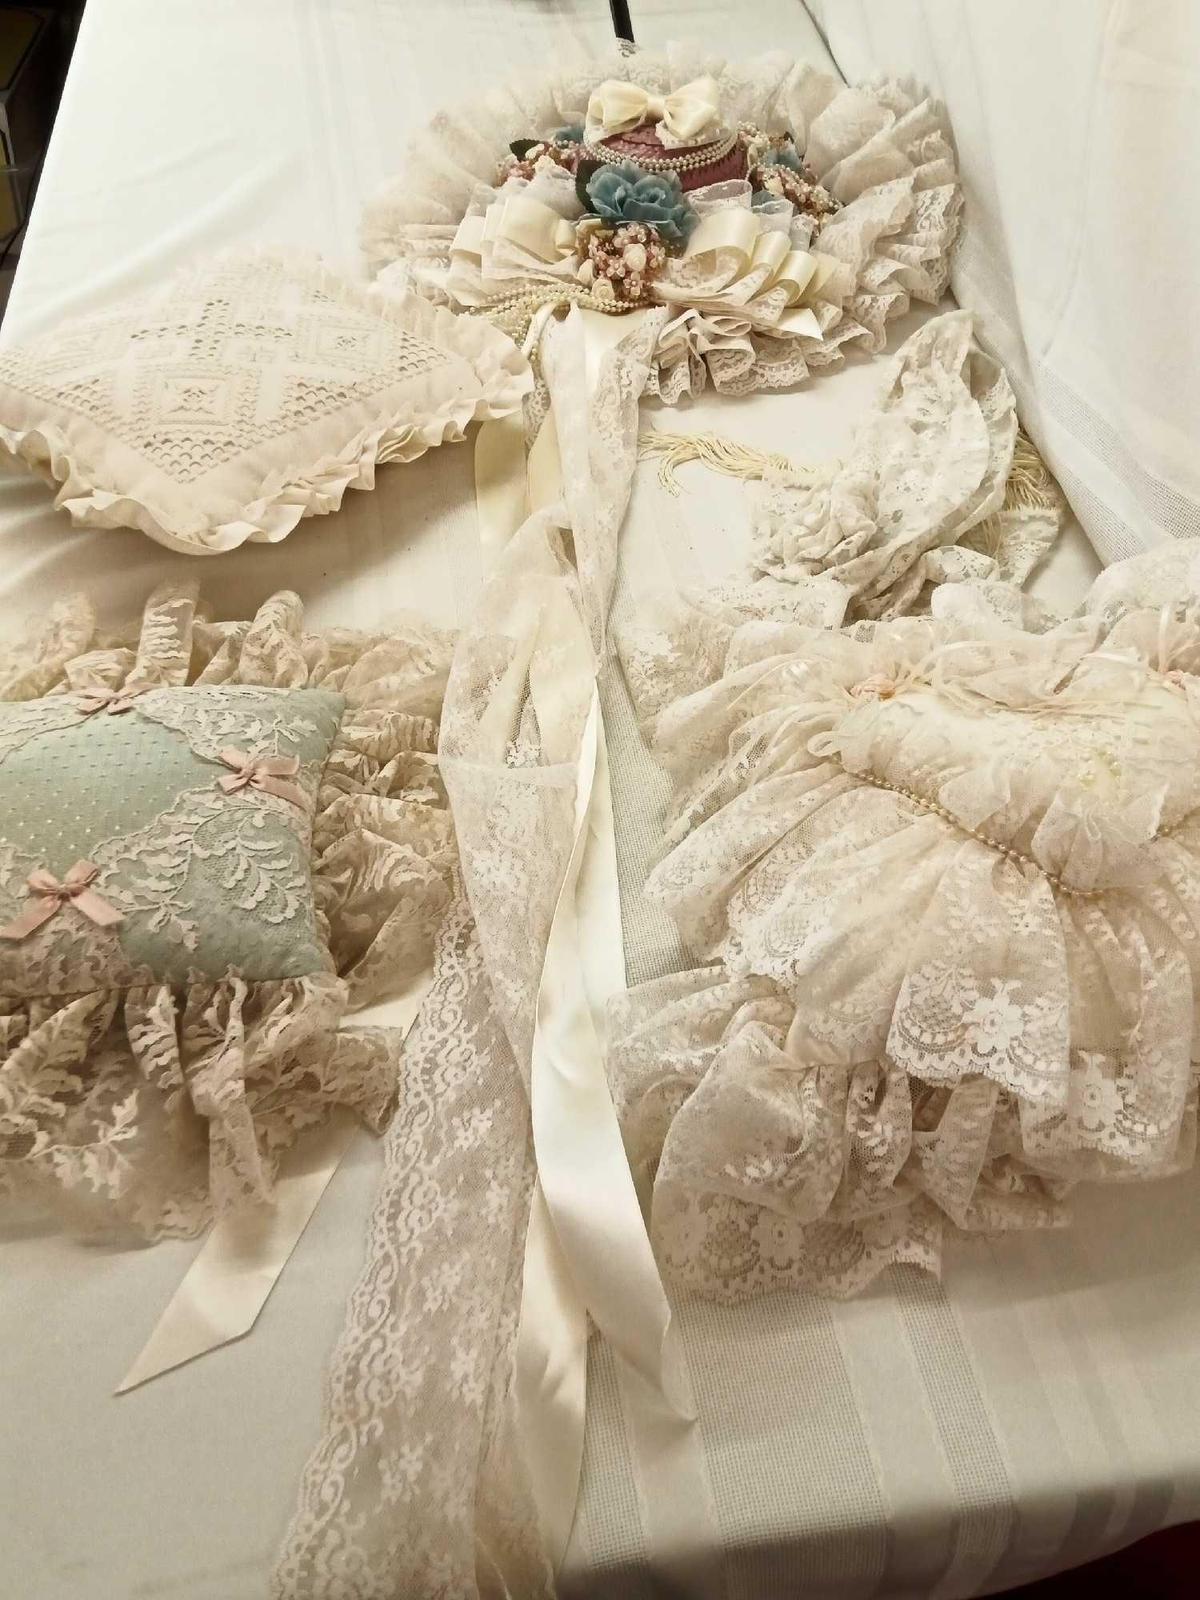 LACE HAT AND ASSORTED LACE PILLOWS